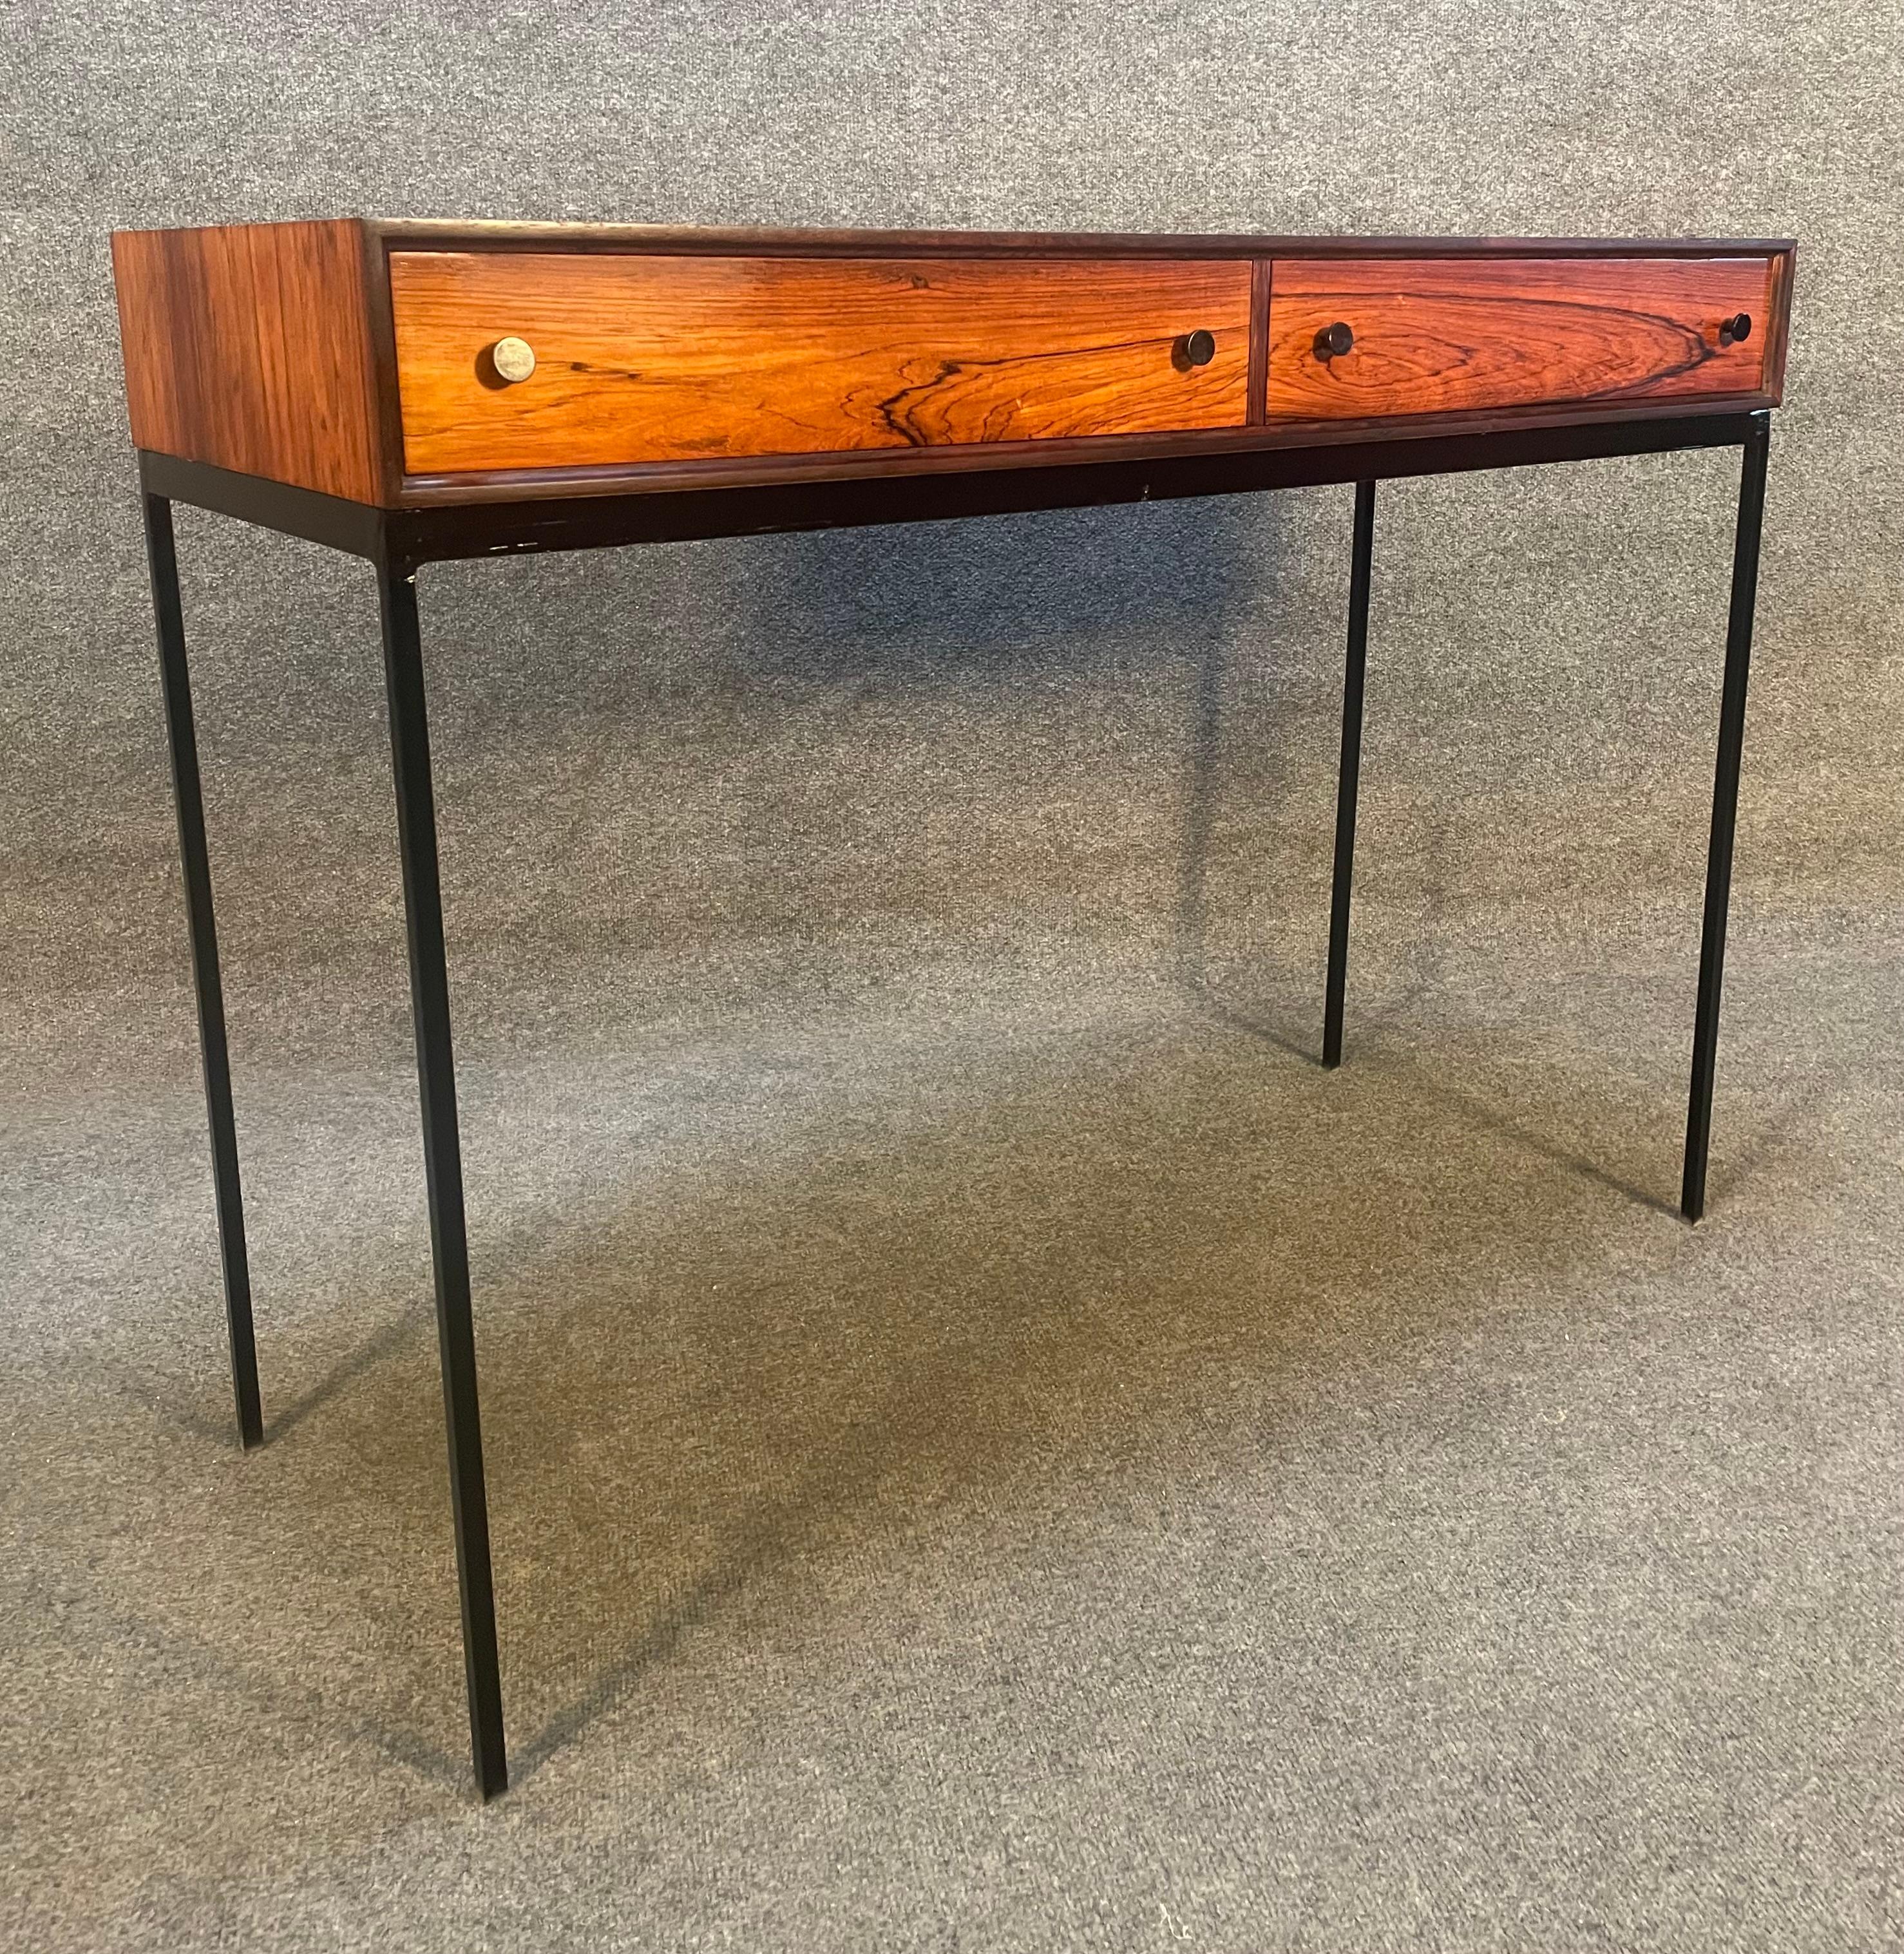 Here is a beautiful Scandinavian Modern entry way console in rosewood designed by Poul Norreklit and manufactured in Sweden in the 1960s.
This lovely case piece, recently imported from Europe to California before its restoration, features a vibrant